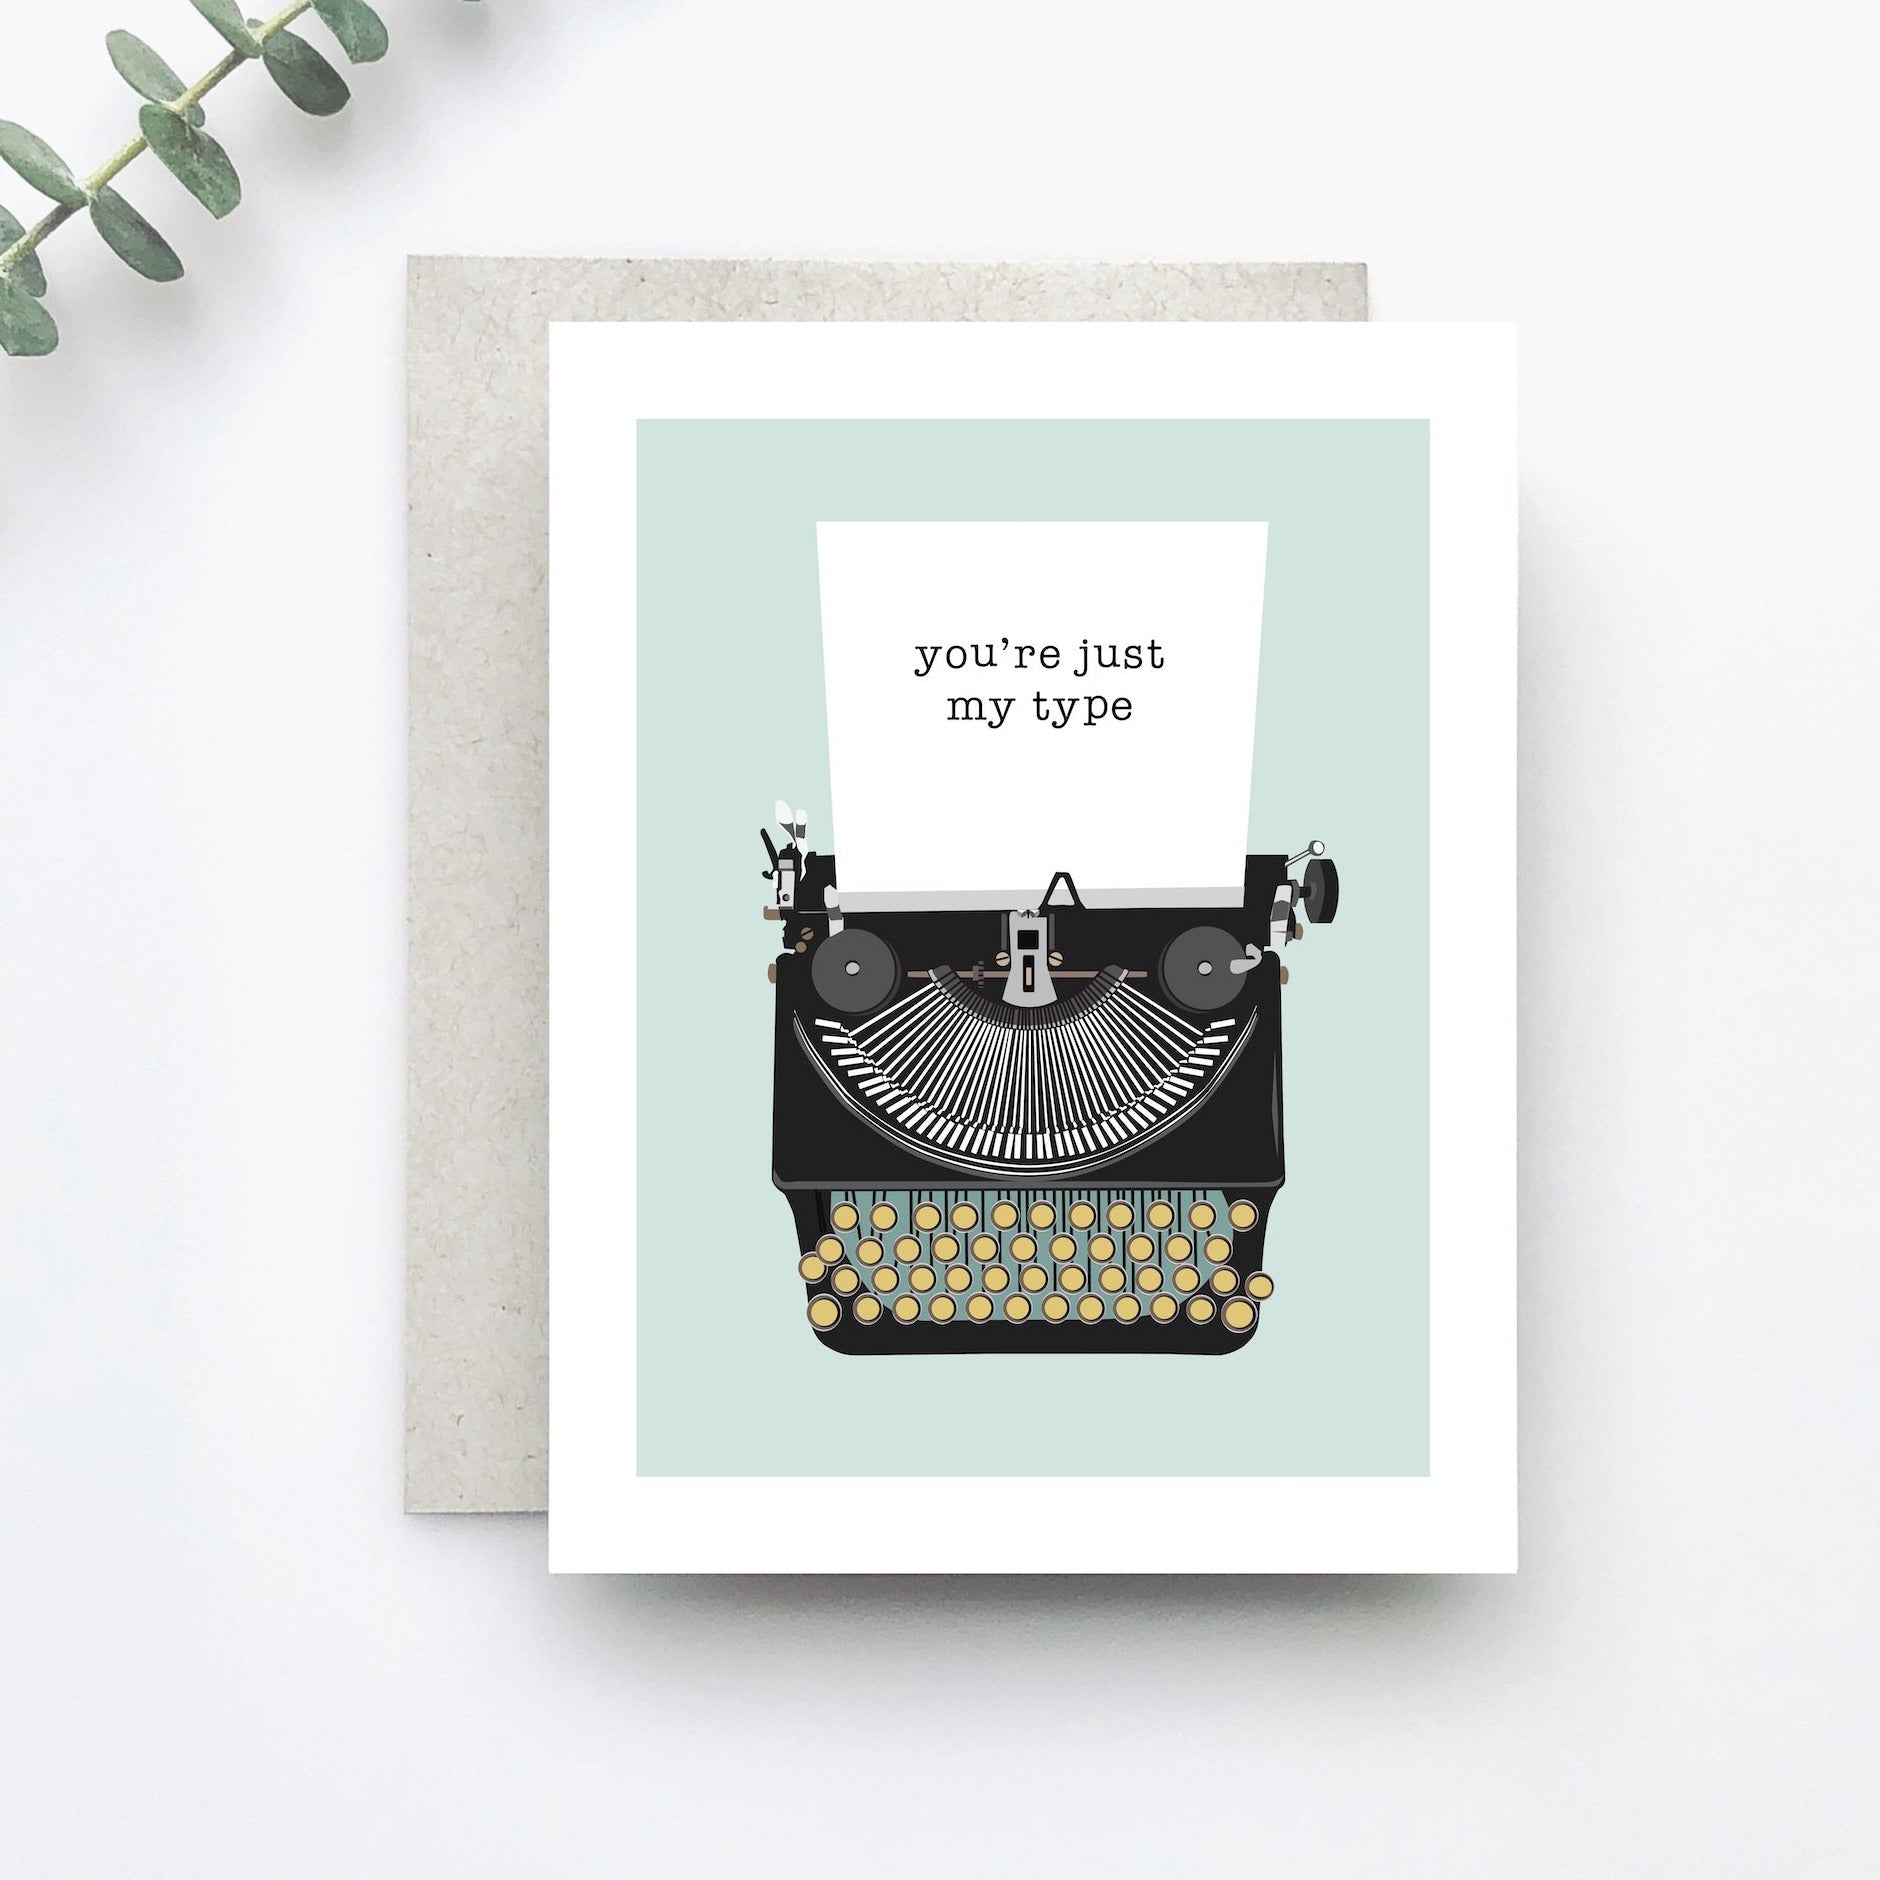 Just My Type Greeting Card